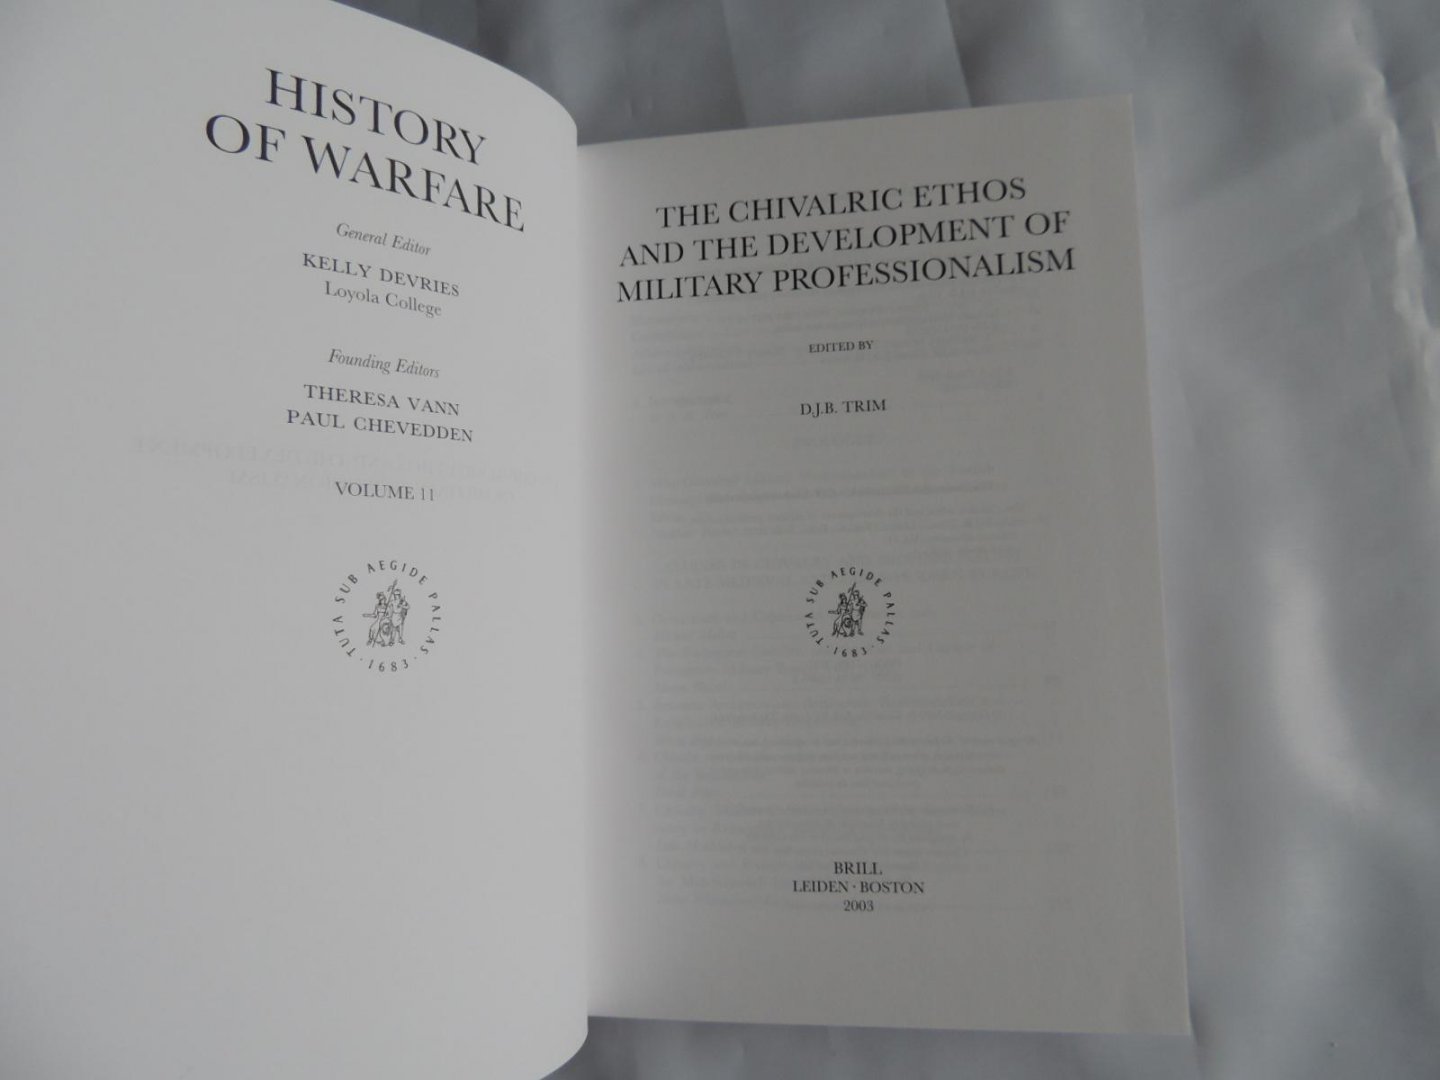 David J B Trim, Kelly De Vries - History of warfare. Volume11. The chivalric ethos and the development of military professionalism